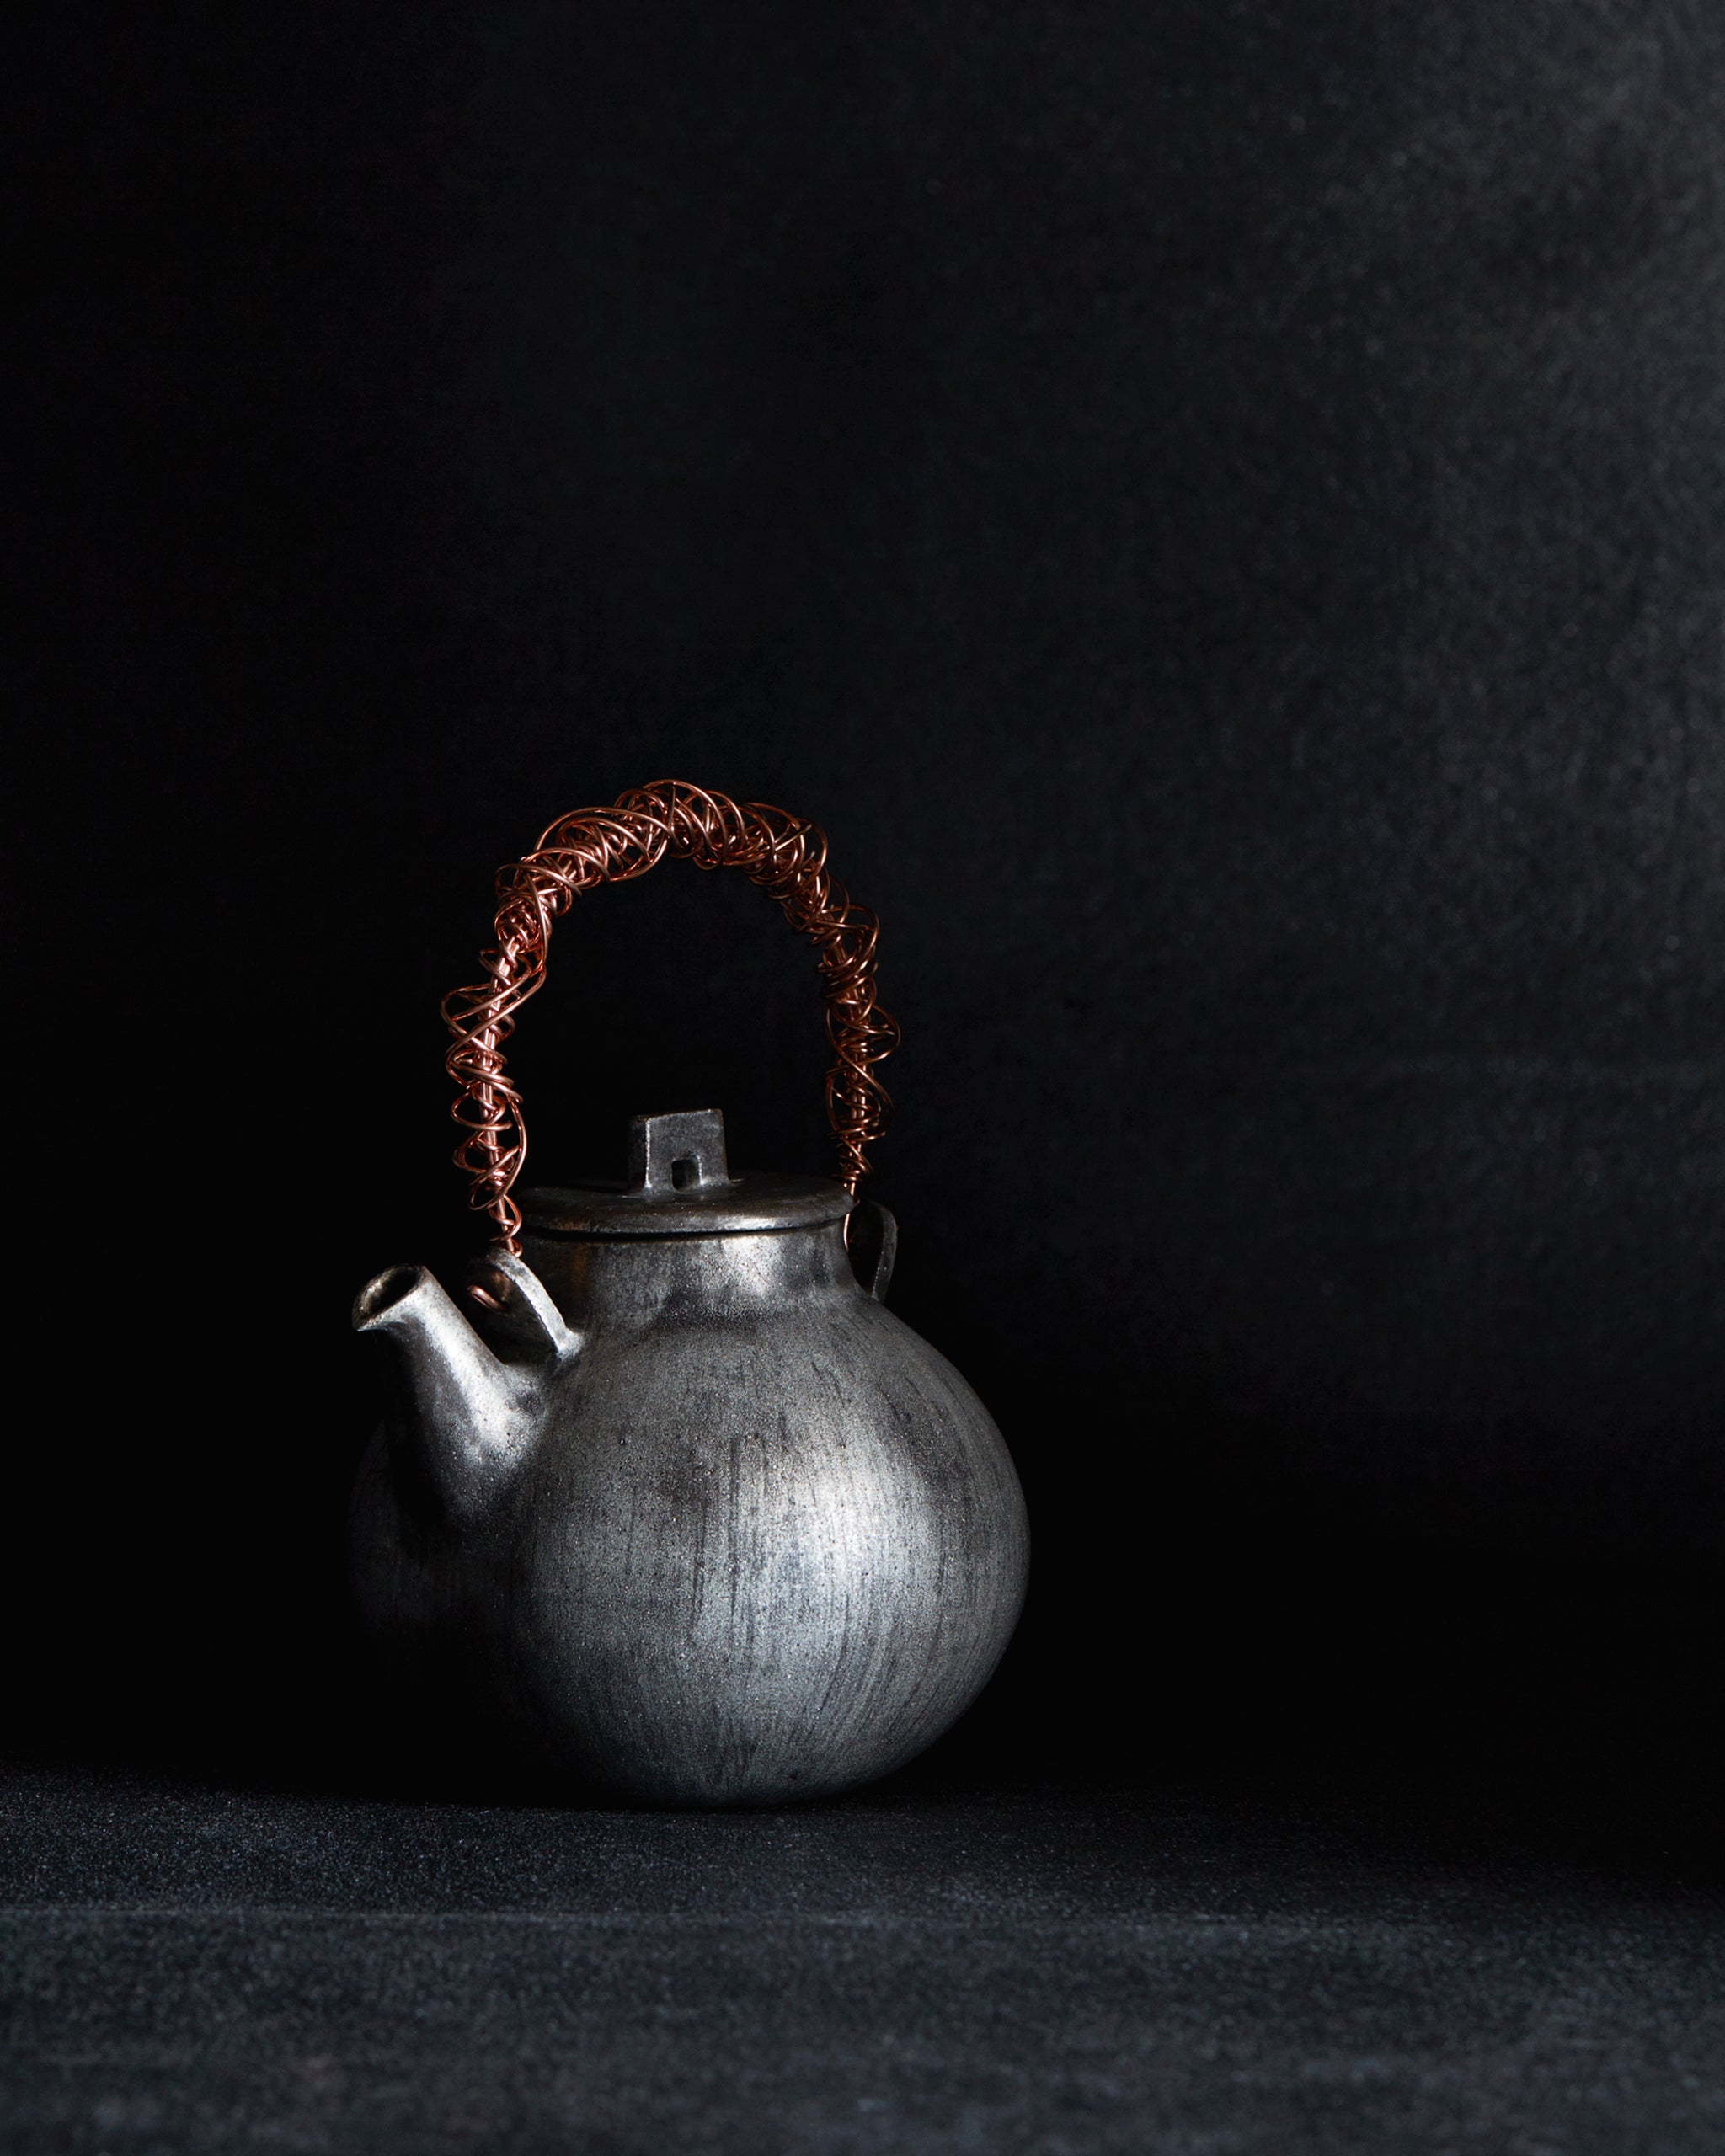 In situation image of small ceramic teapot with sterling silver overglaze and twisted copper wire handle by Masanobu Ando against charcoal-gray background.